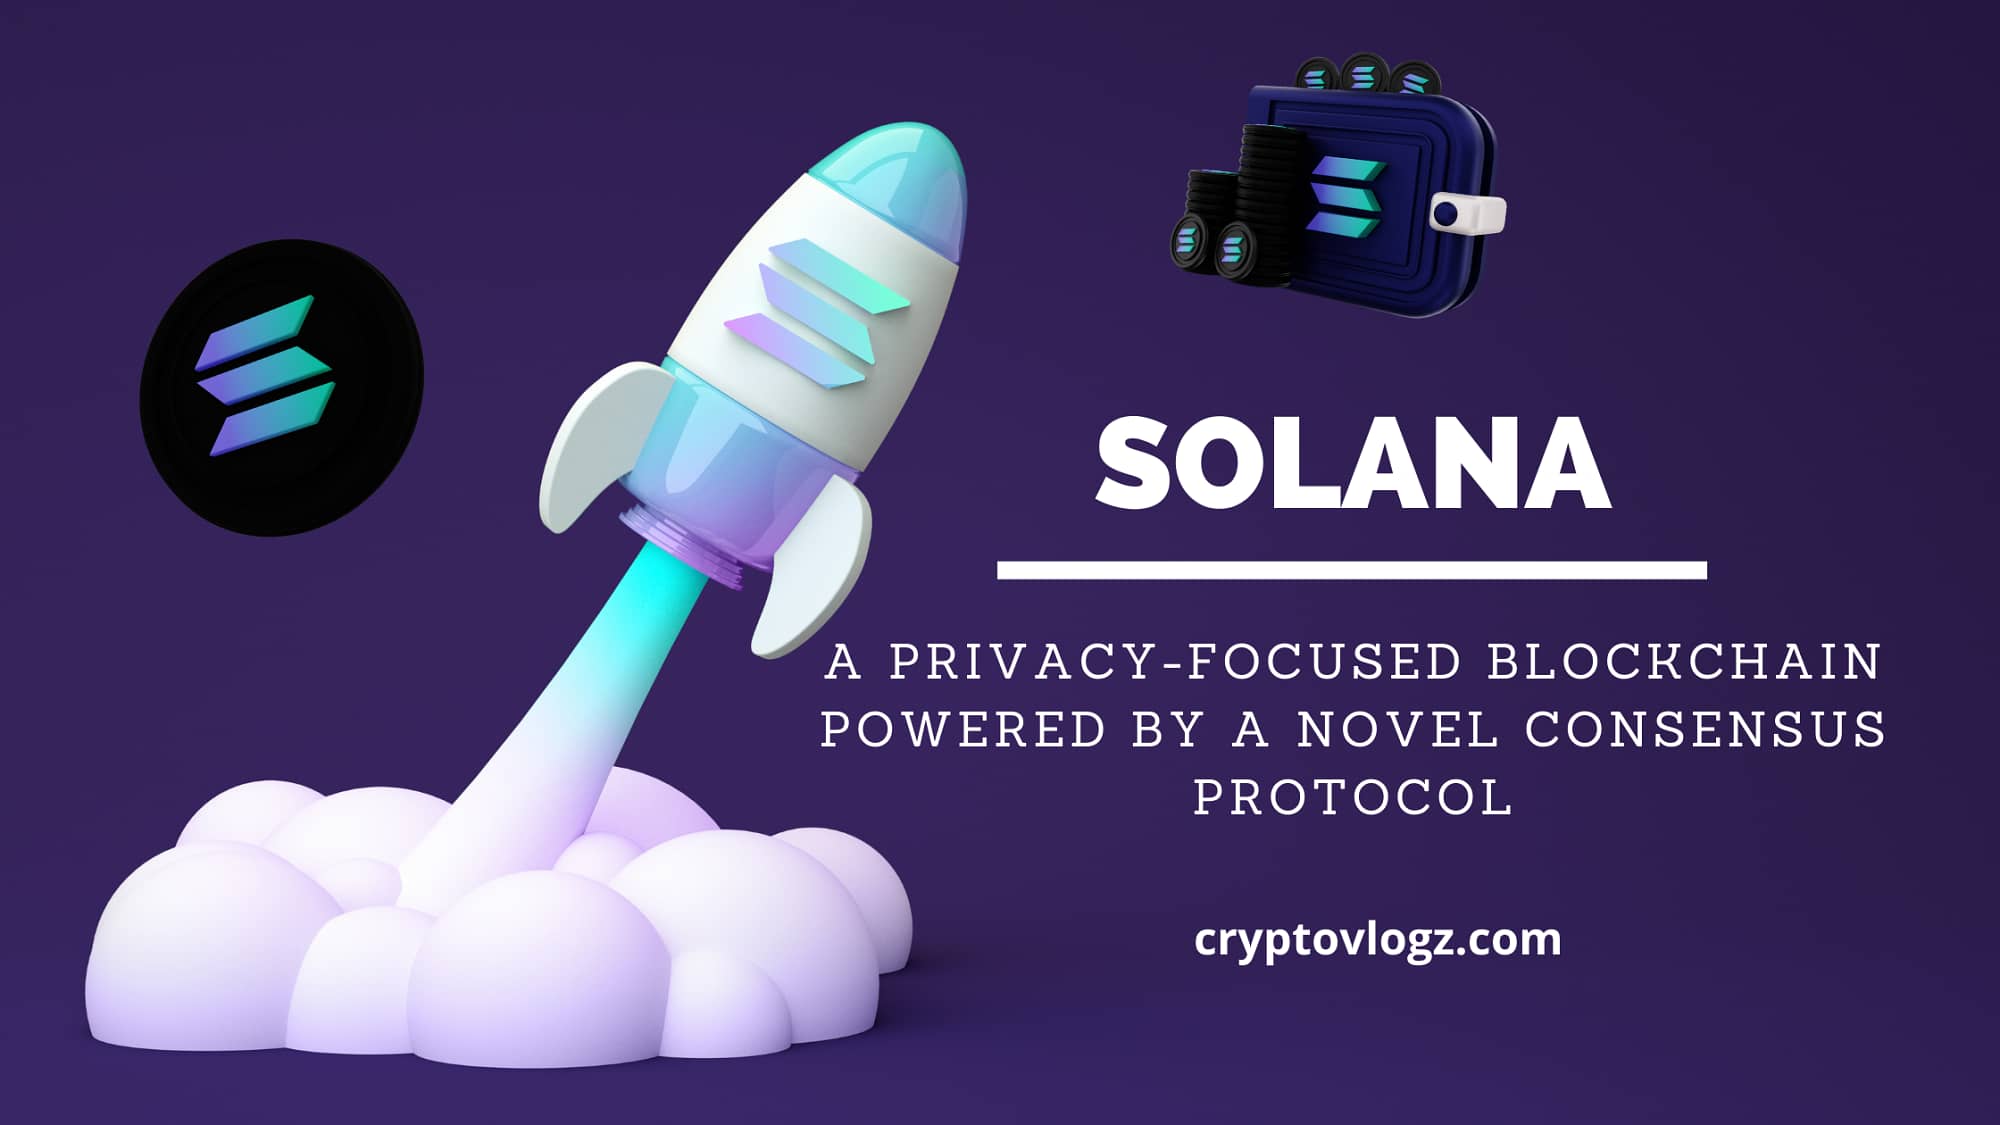 Solana: A Privacy-Focused Blockchain Powered by a Novel Consensus Protocol